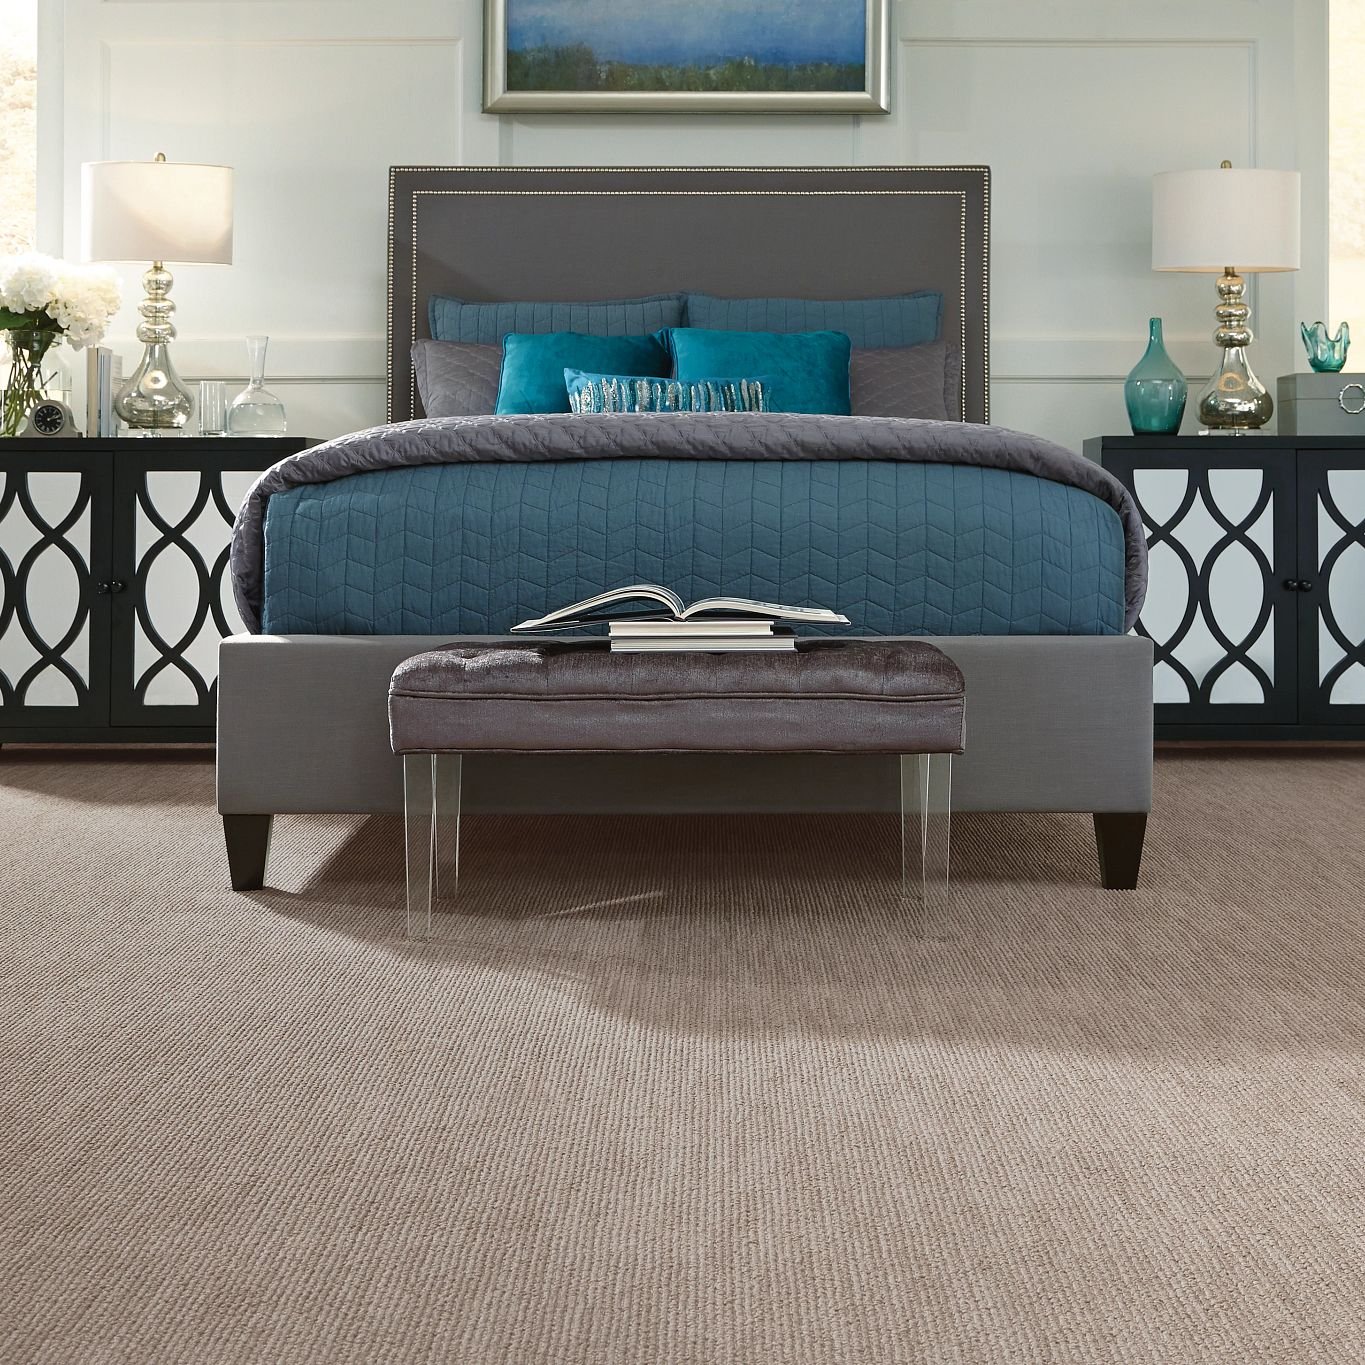 carpeted bedroom - House of Carpets Inc. in North Chesterfield